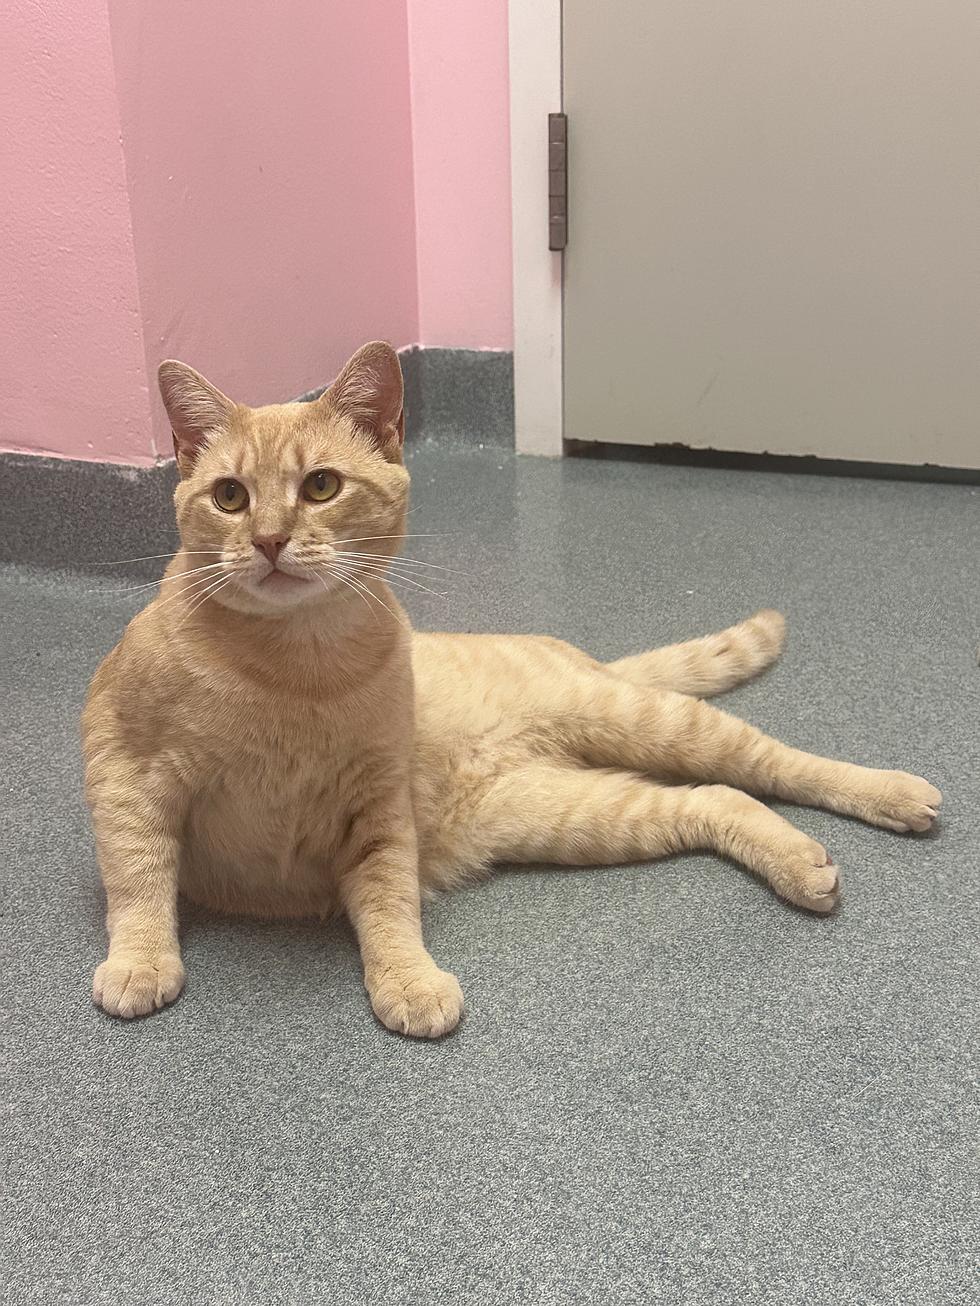 Meet The Maine Cat Everybody Loves, The ‘Pet Of The Week’, Raymond.